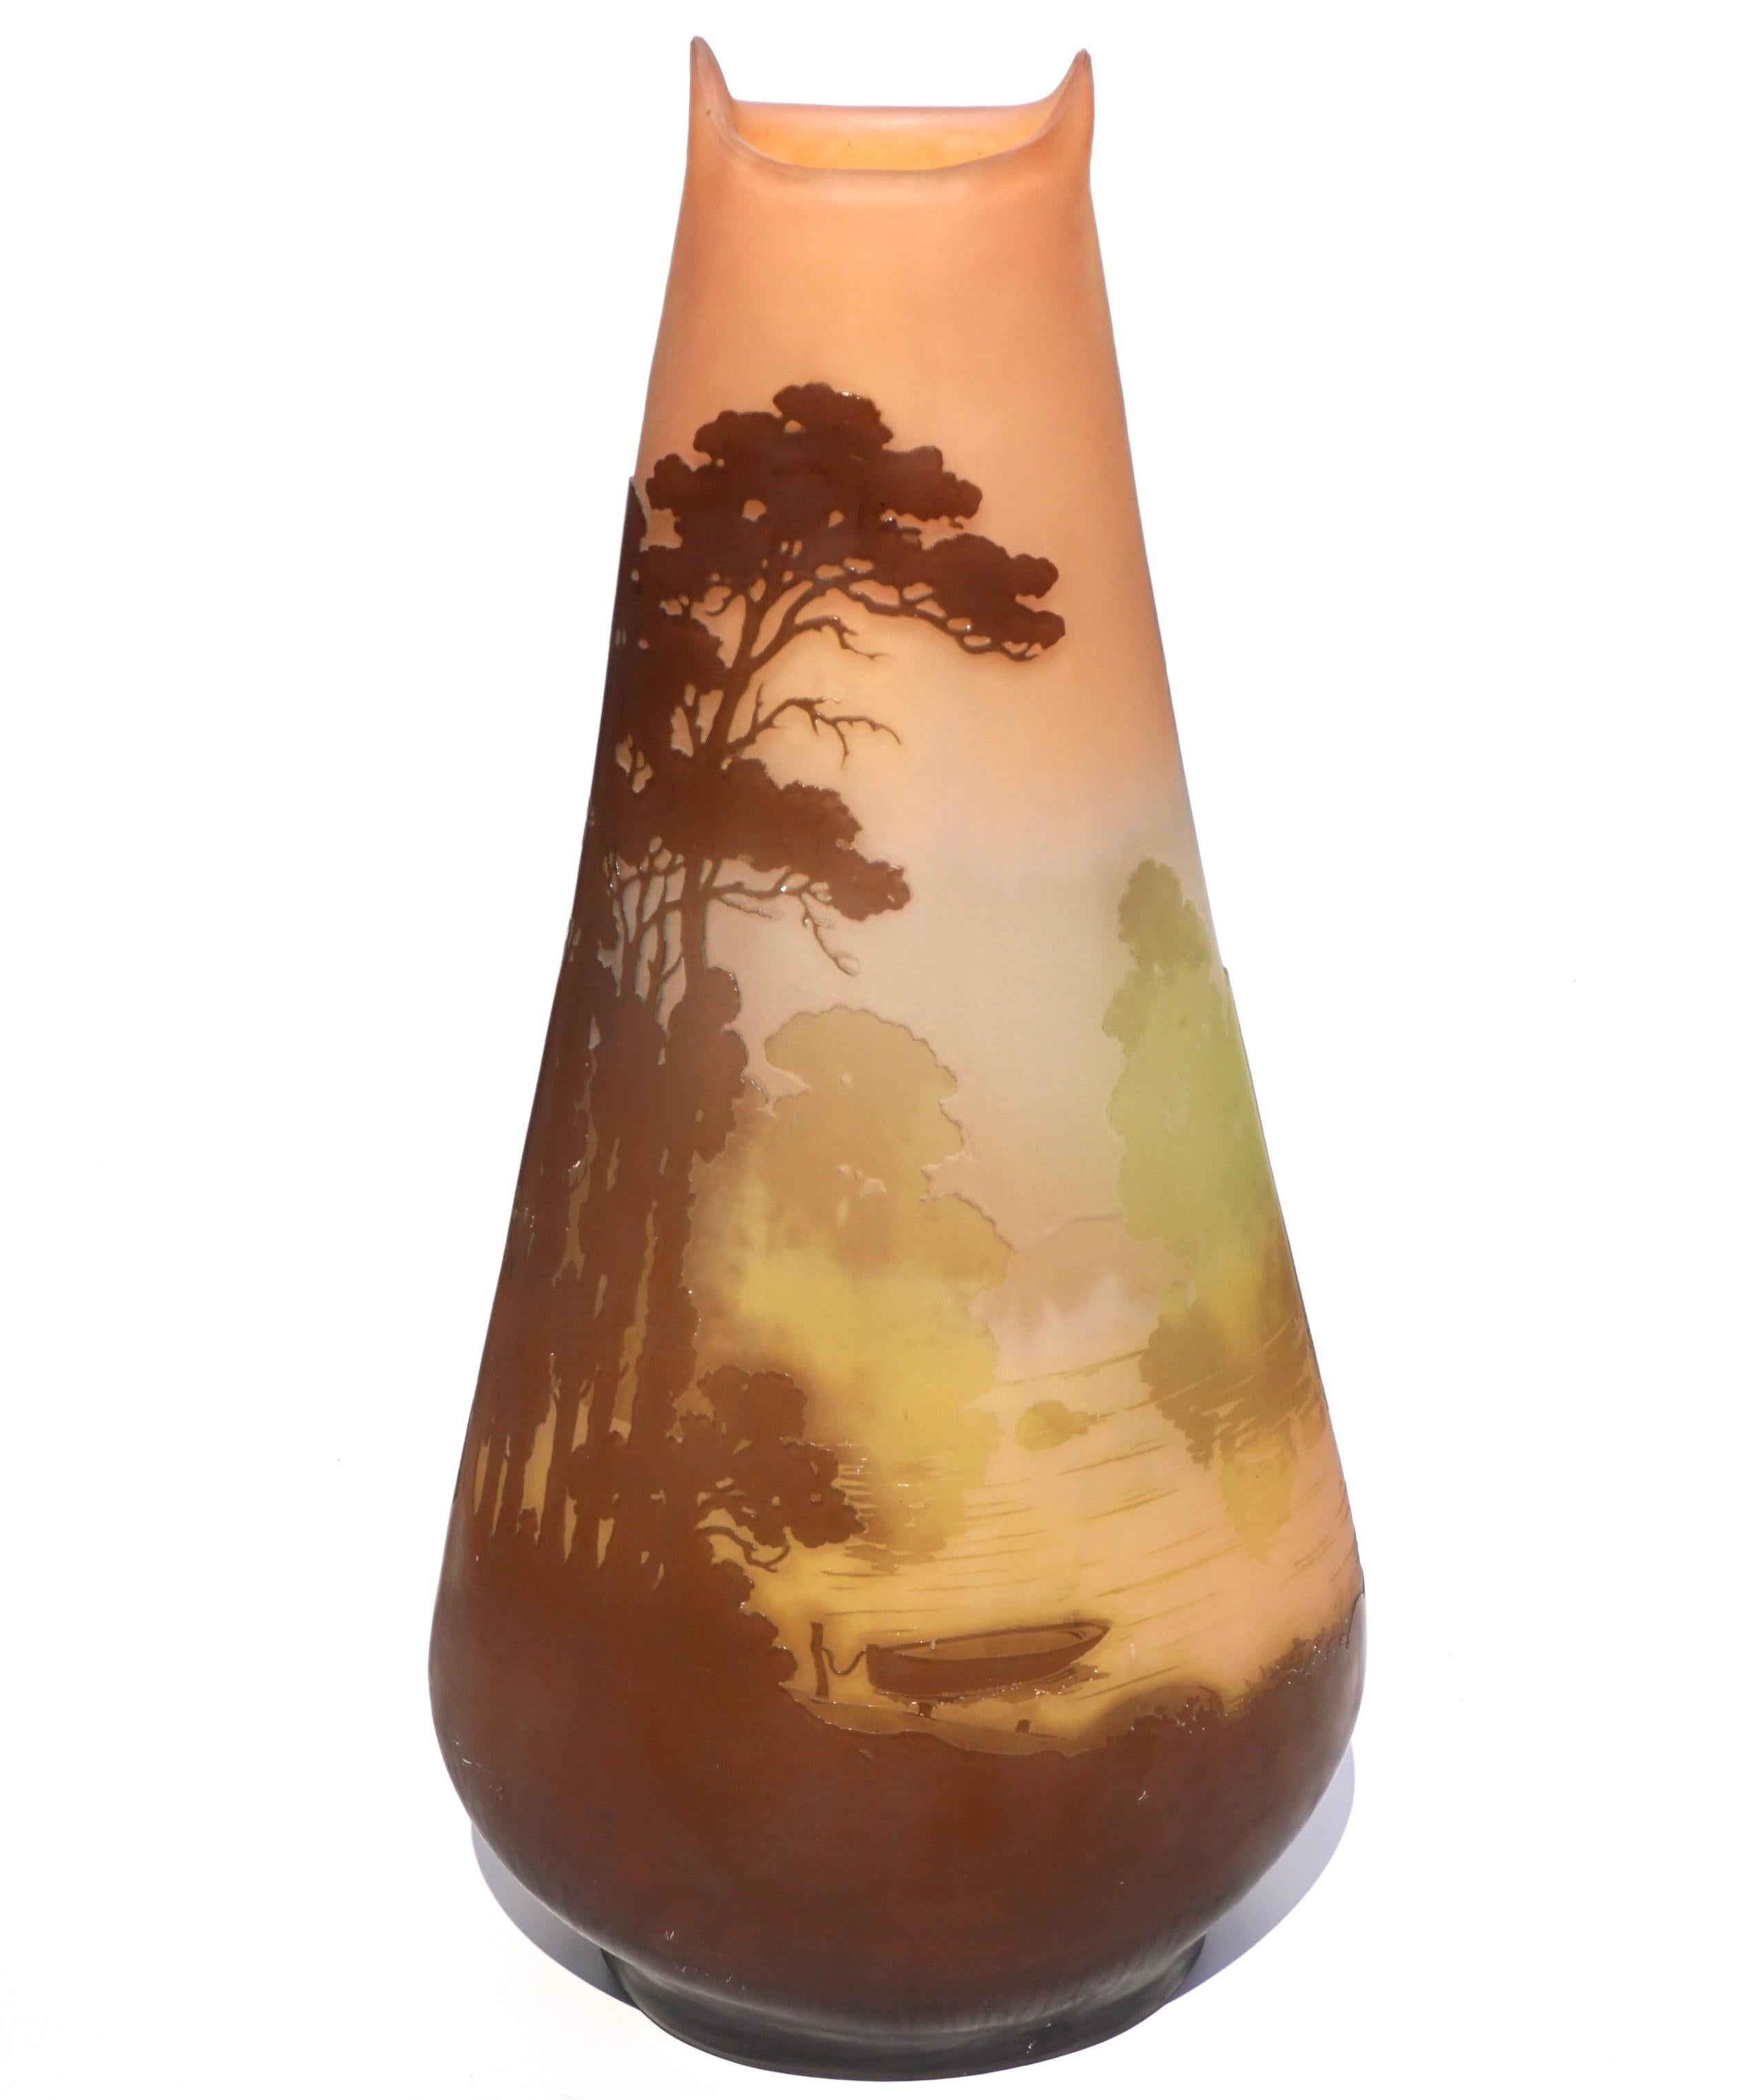 Emile Galle scenic wheel carved and acid etched cameo vase.

A beautiful and tall cameo vase by Galle. The 18 - 1/2” tall vase has a background of muted yellow glass near the base, which progresses to blue/gray at mid-vase, and then peach towards